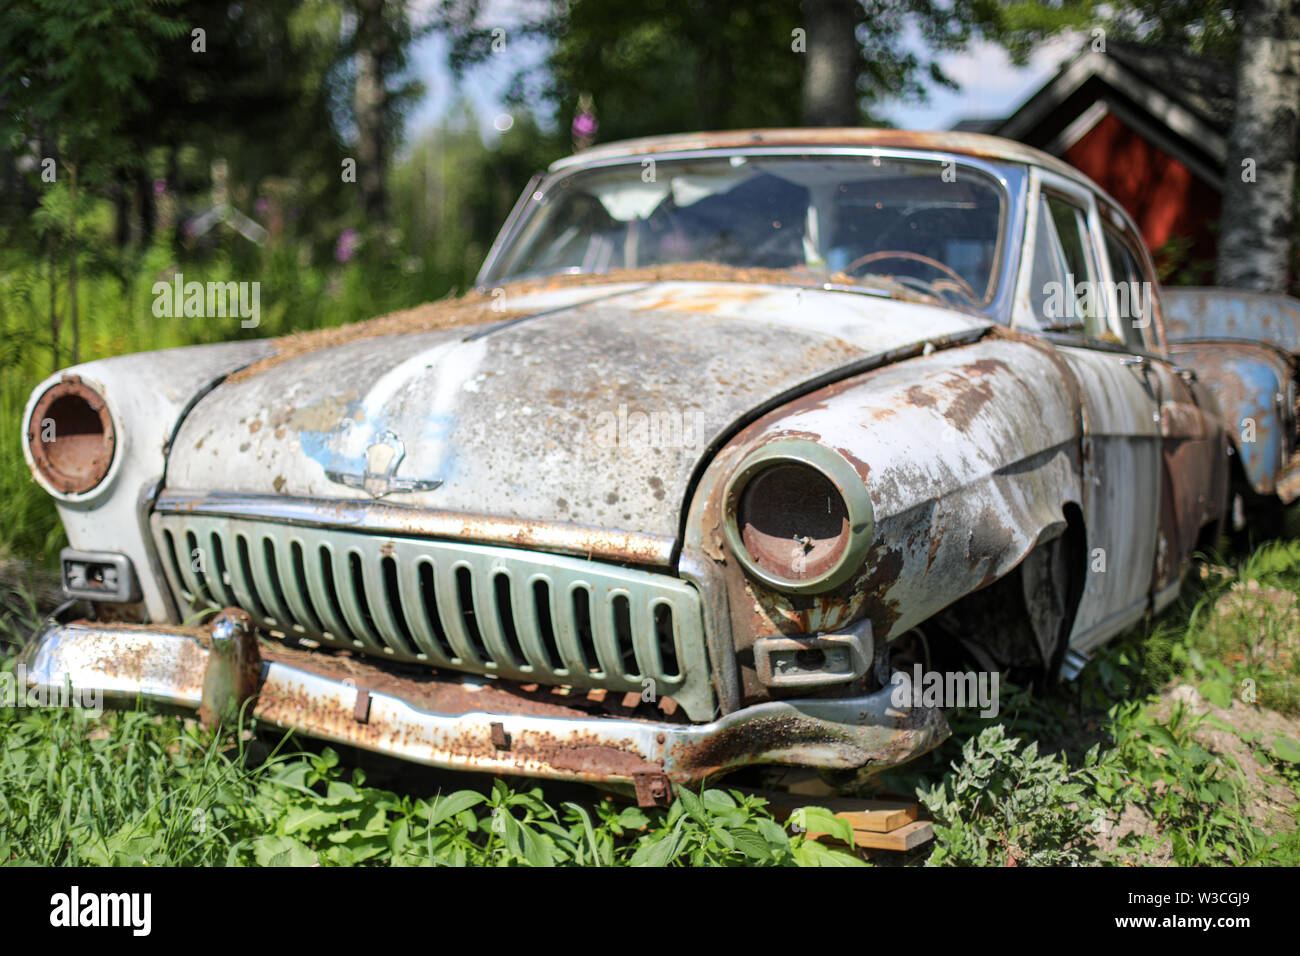 Ruins of a 1950's car in Ylöjärvi, Finland Stock Photo